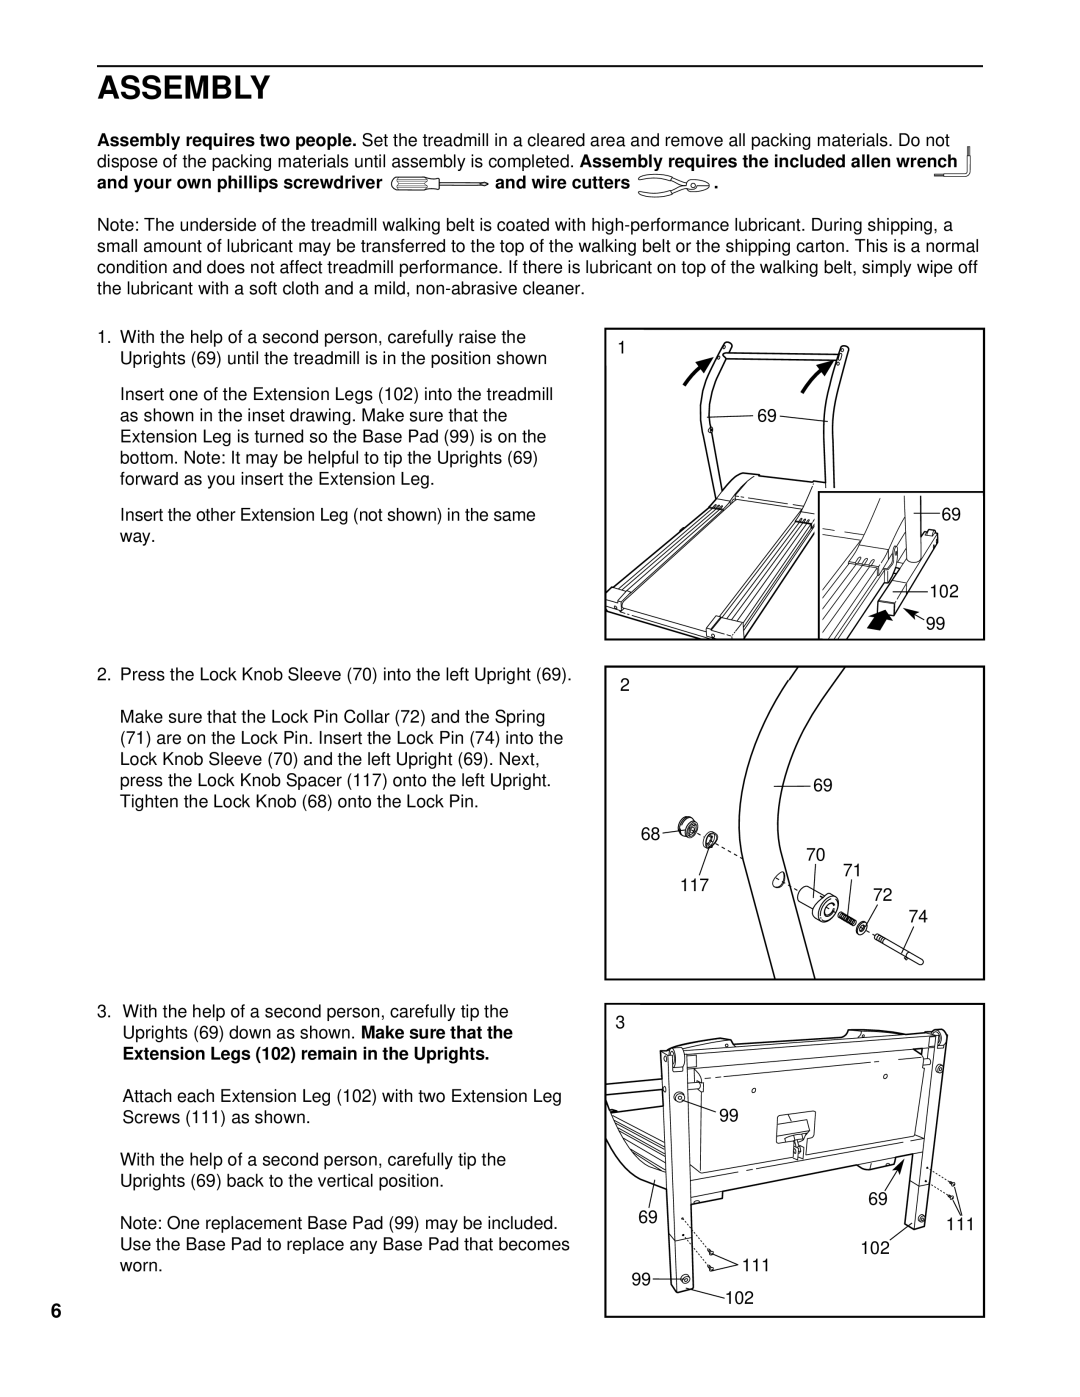 NordicTrack NTTL09994 user manual Assembly, and your own phillips screwdriver and wire cutters 